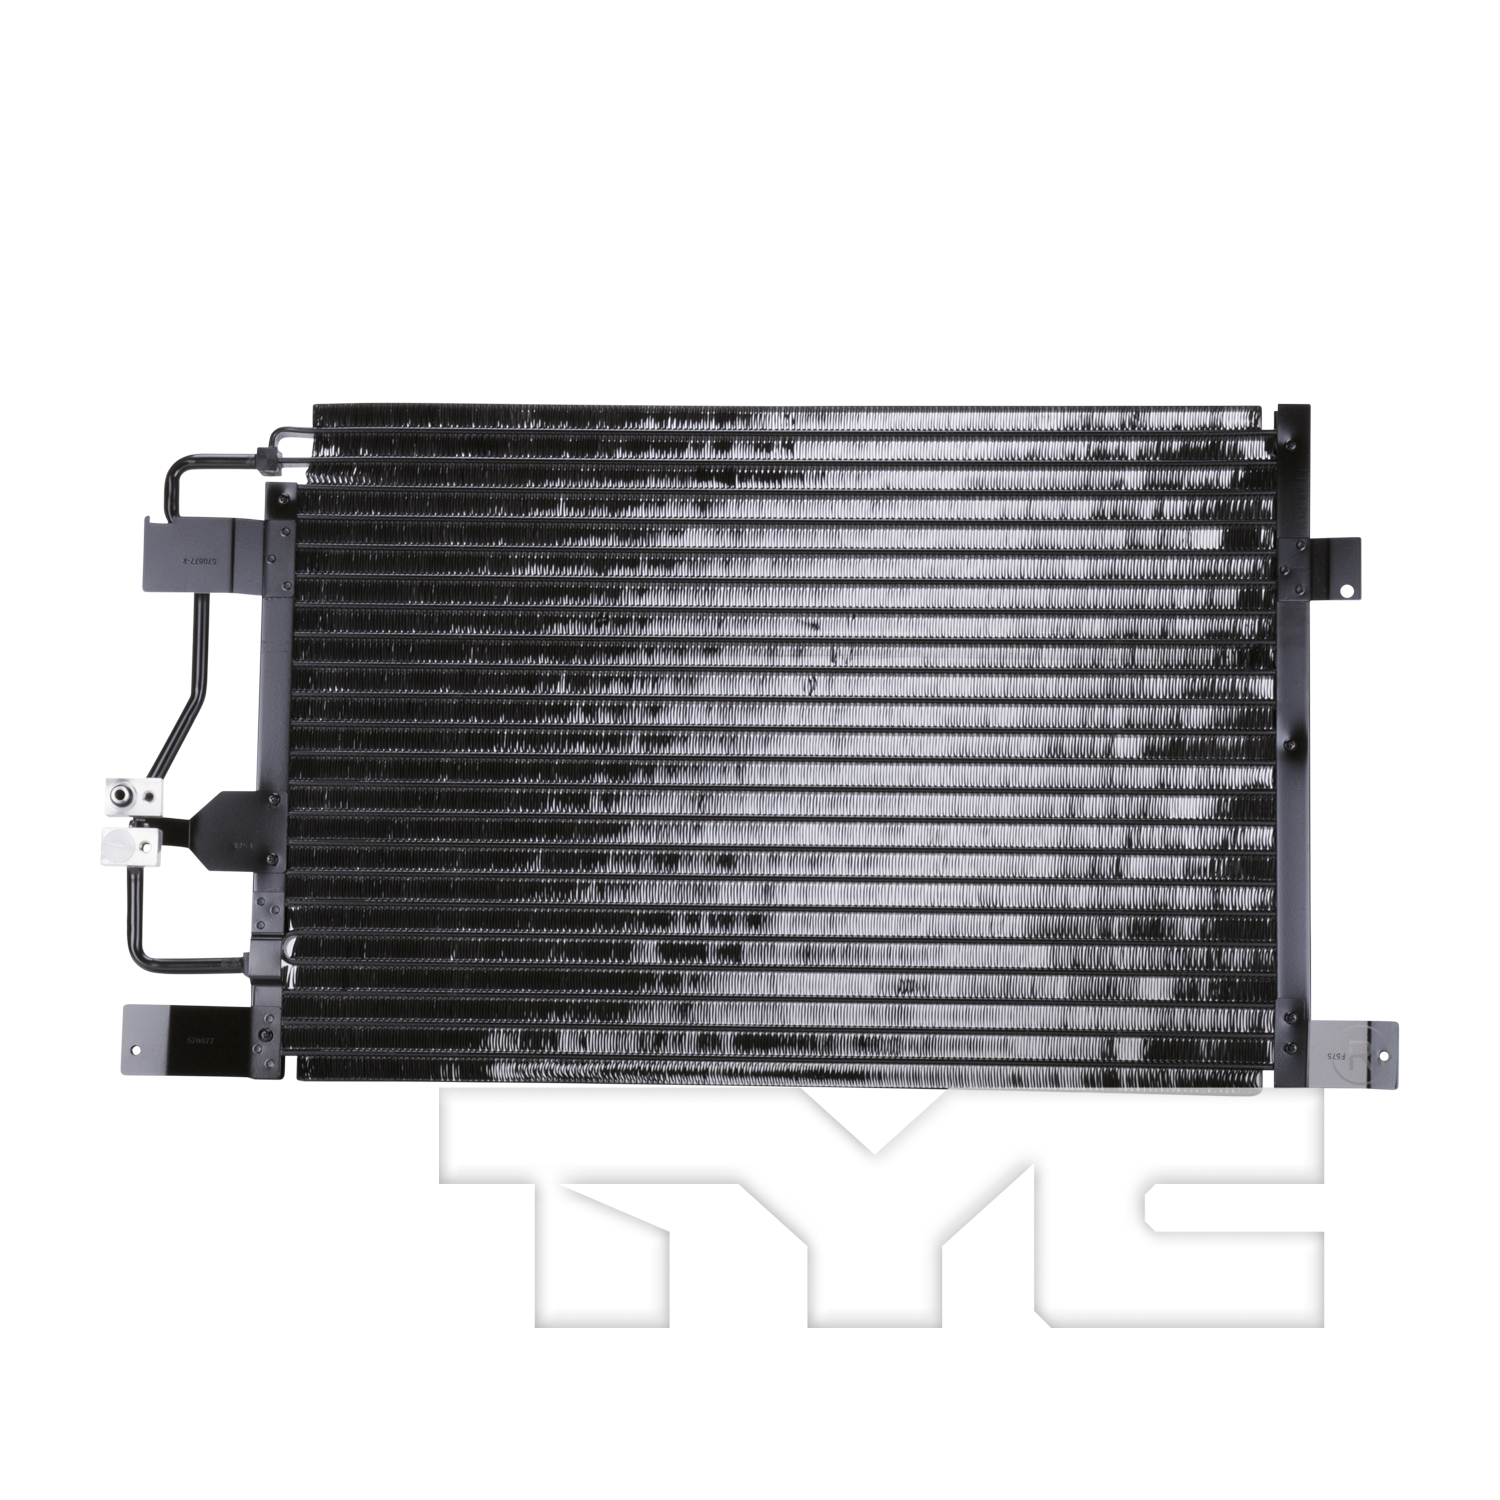 Aftermarket AC CONDENSERS for MERCURY - GRAND MARQUIS, GRAND MARQUIS,98-02,Air conditioning condenser